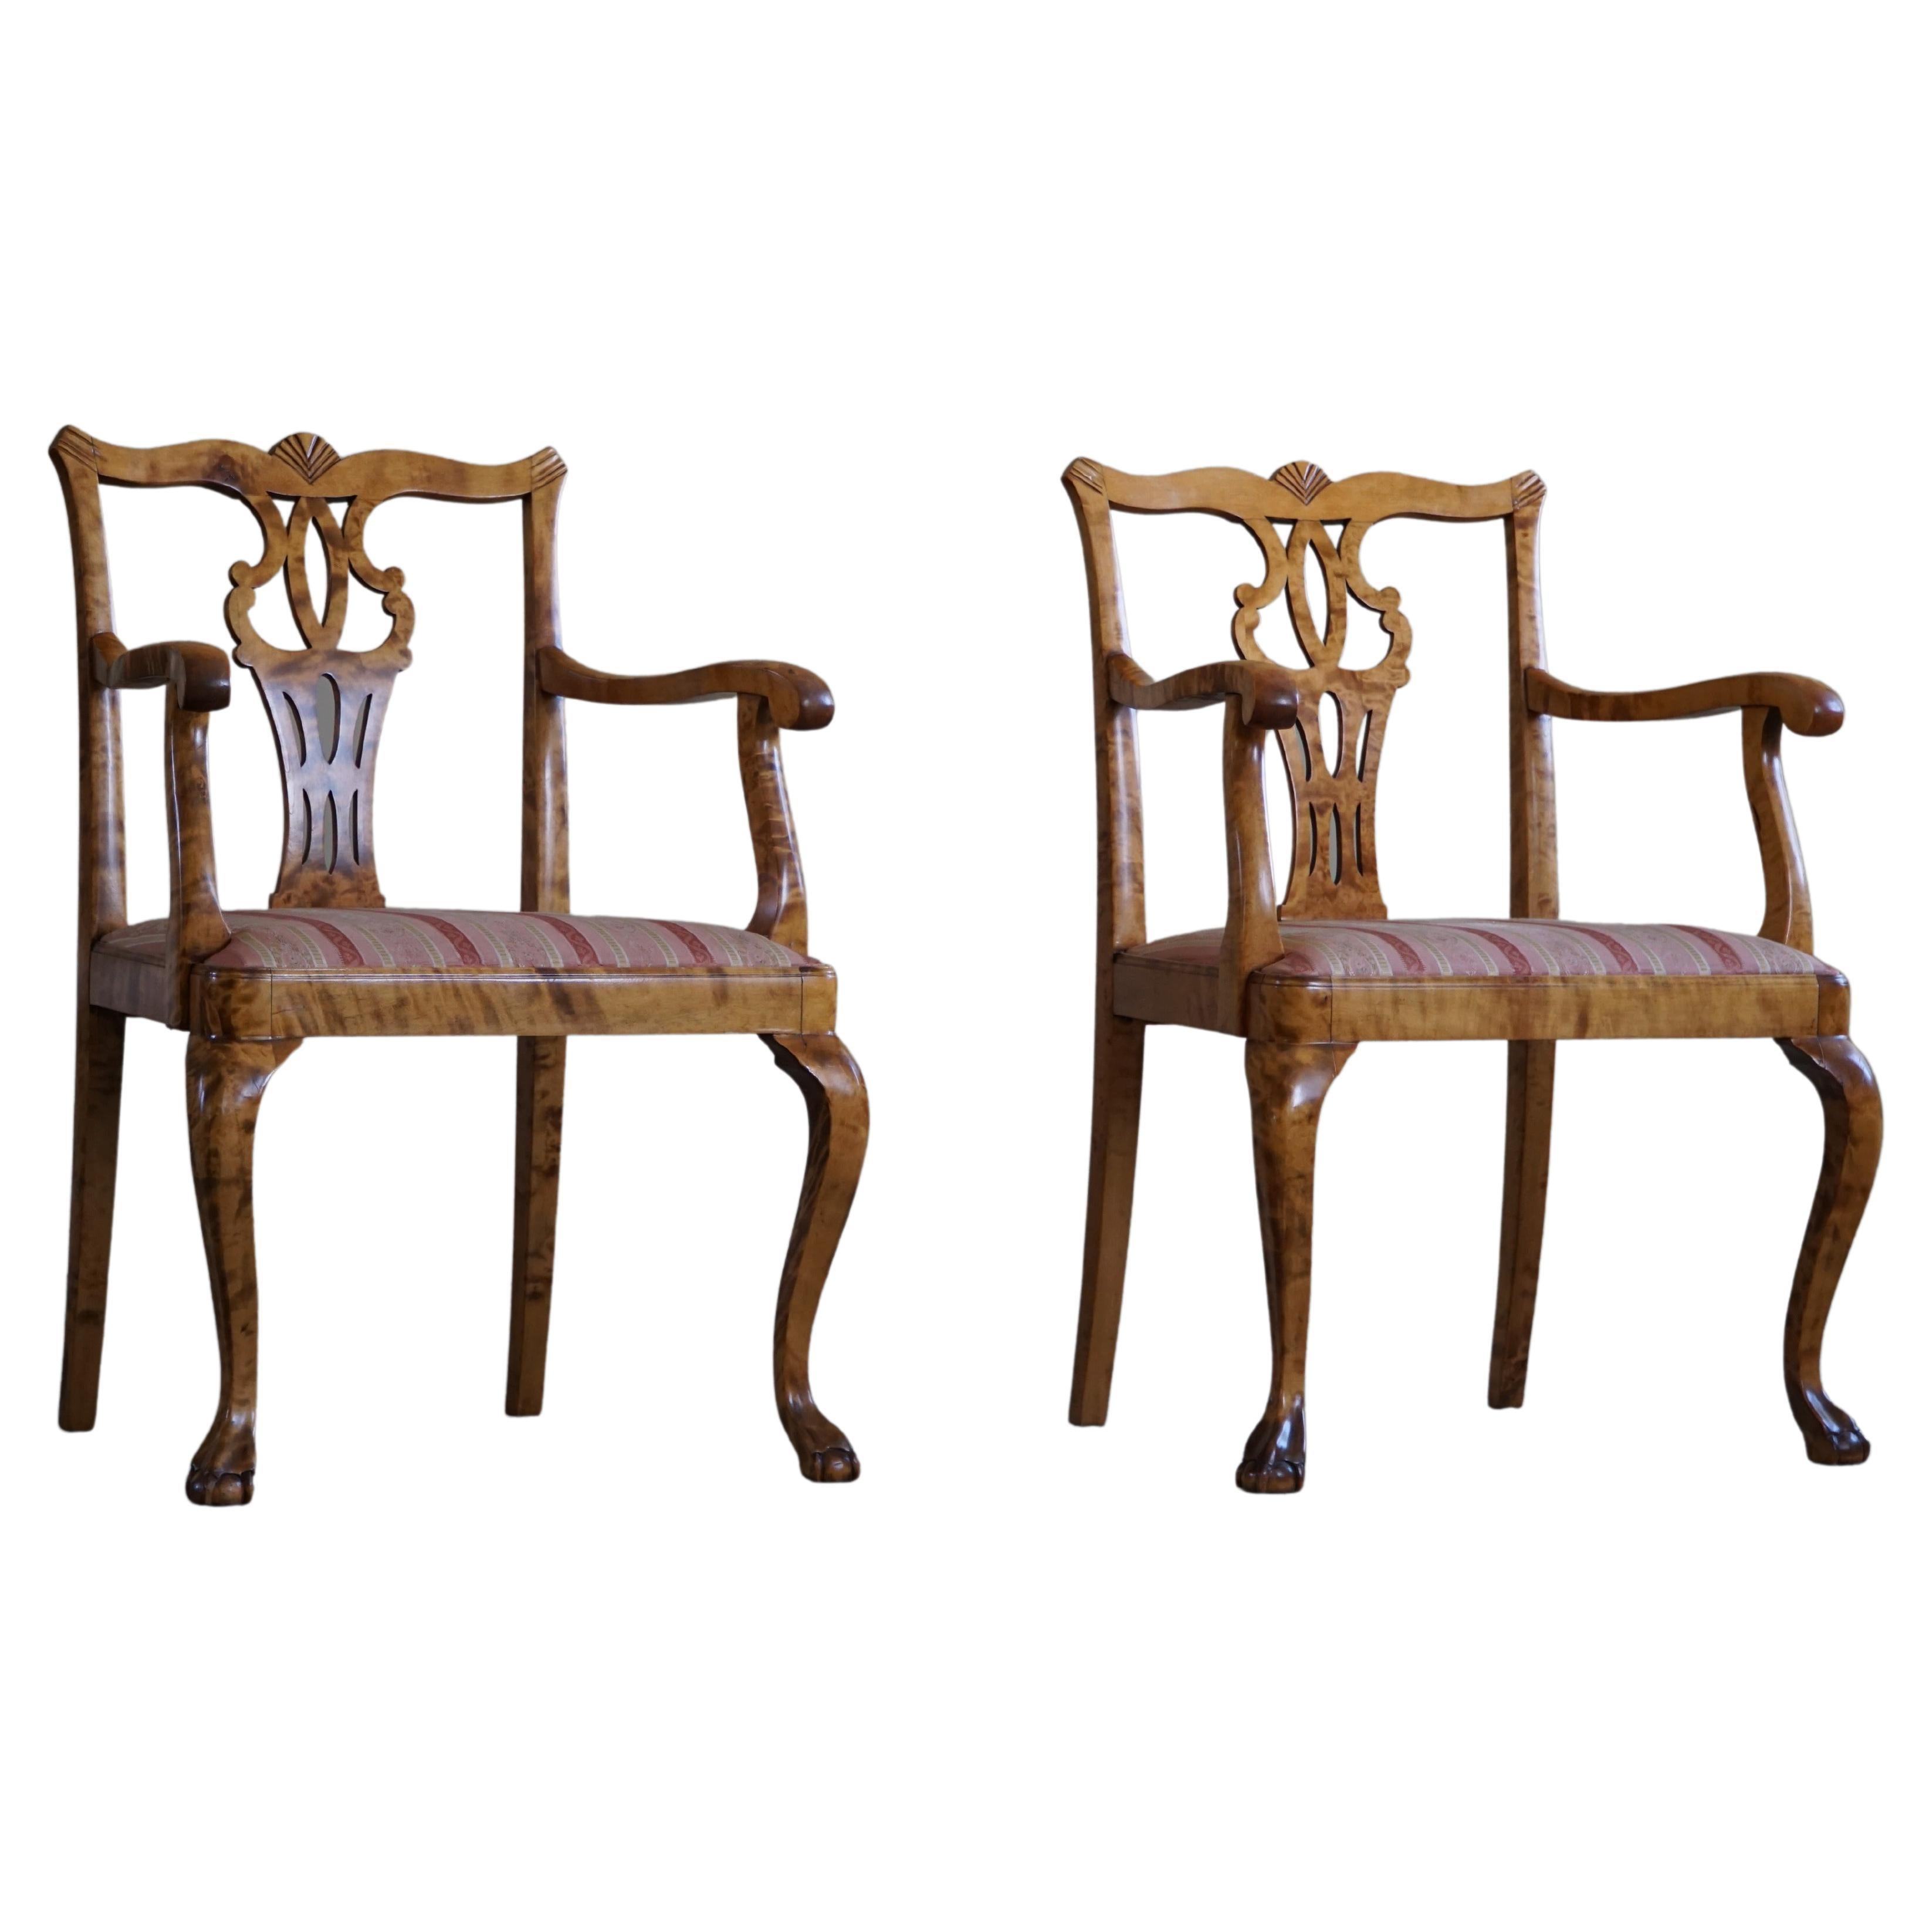 A Pair of English Chippendale Style Armchairs in Birch, 20th Century, England